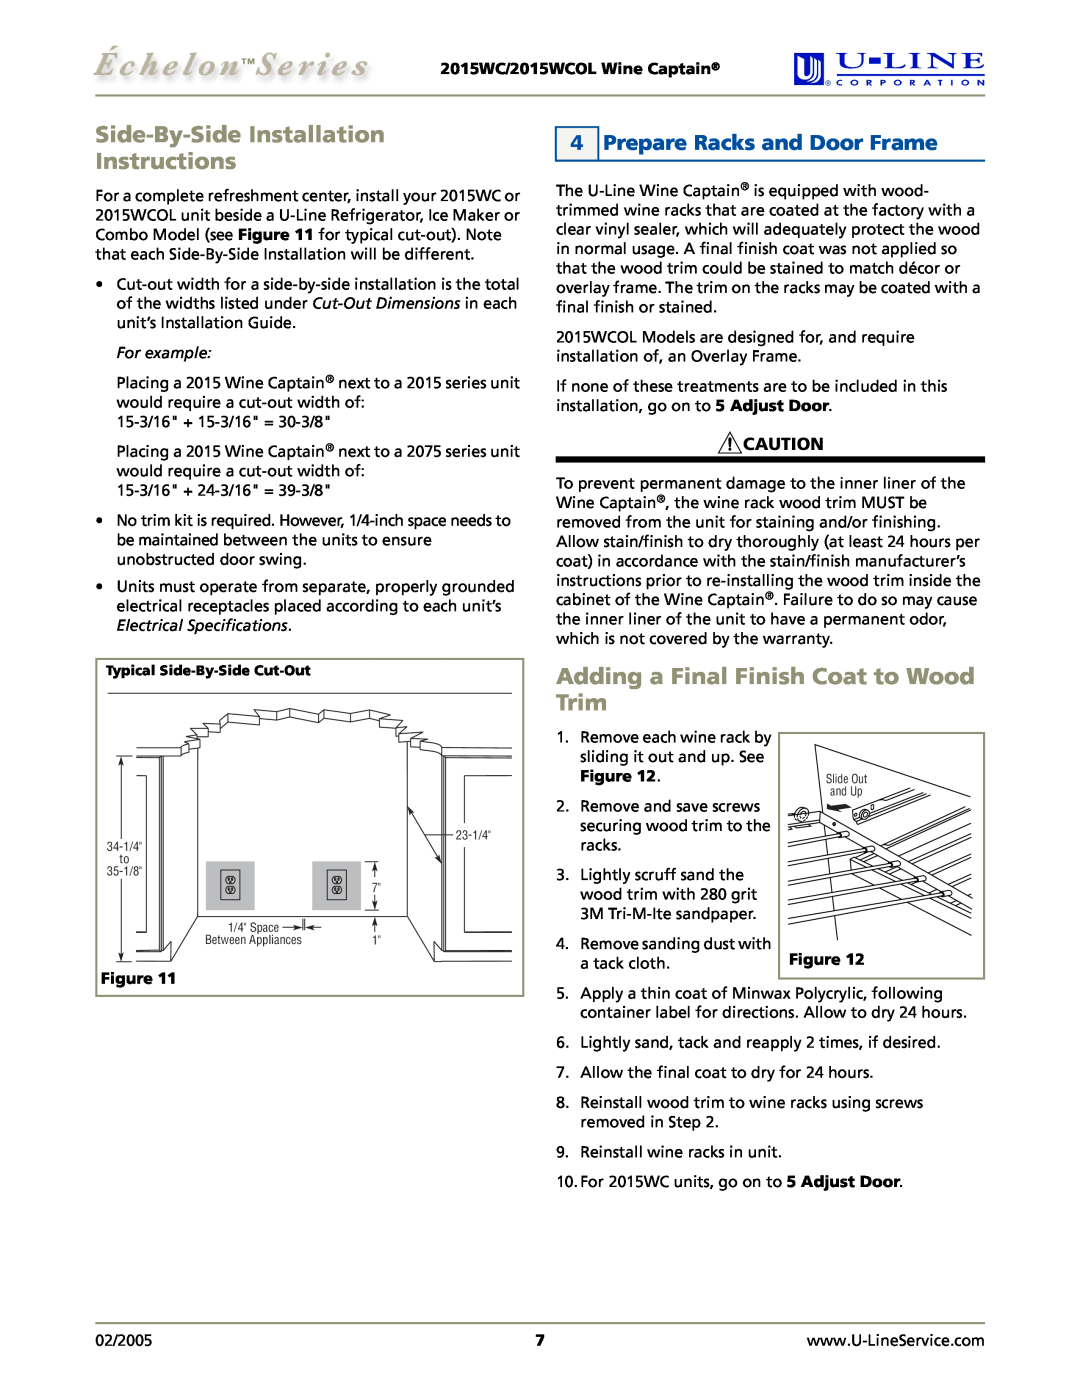 U-Line 2015WCOL manual Side-By-SideInstallation Instructions, Adding a Final Finish Coat to Wood Trim, For example 